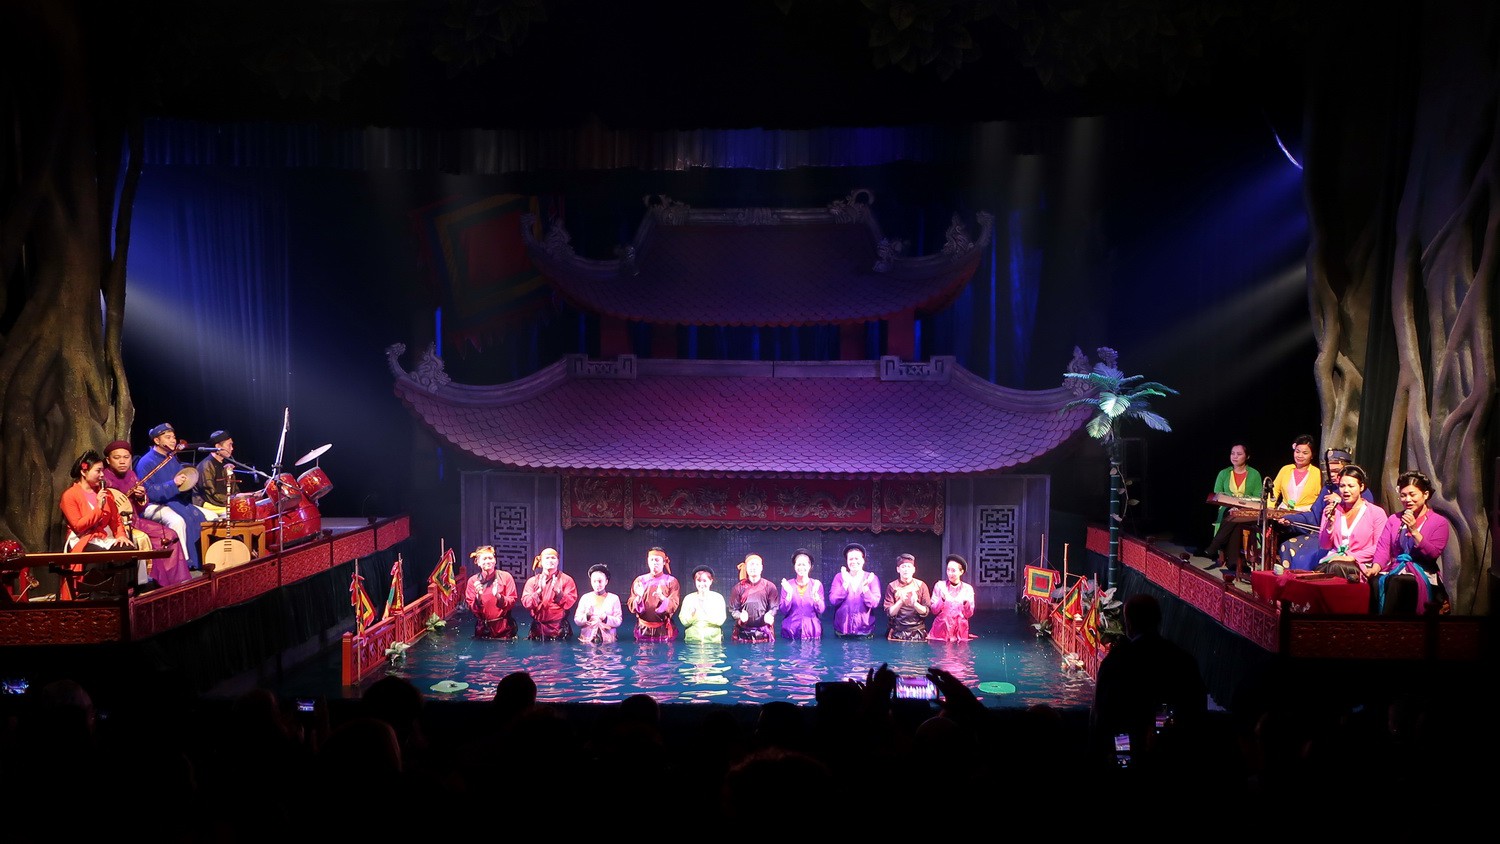 The playing people in the Thang Long Water Puppet Theater